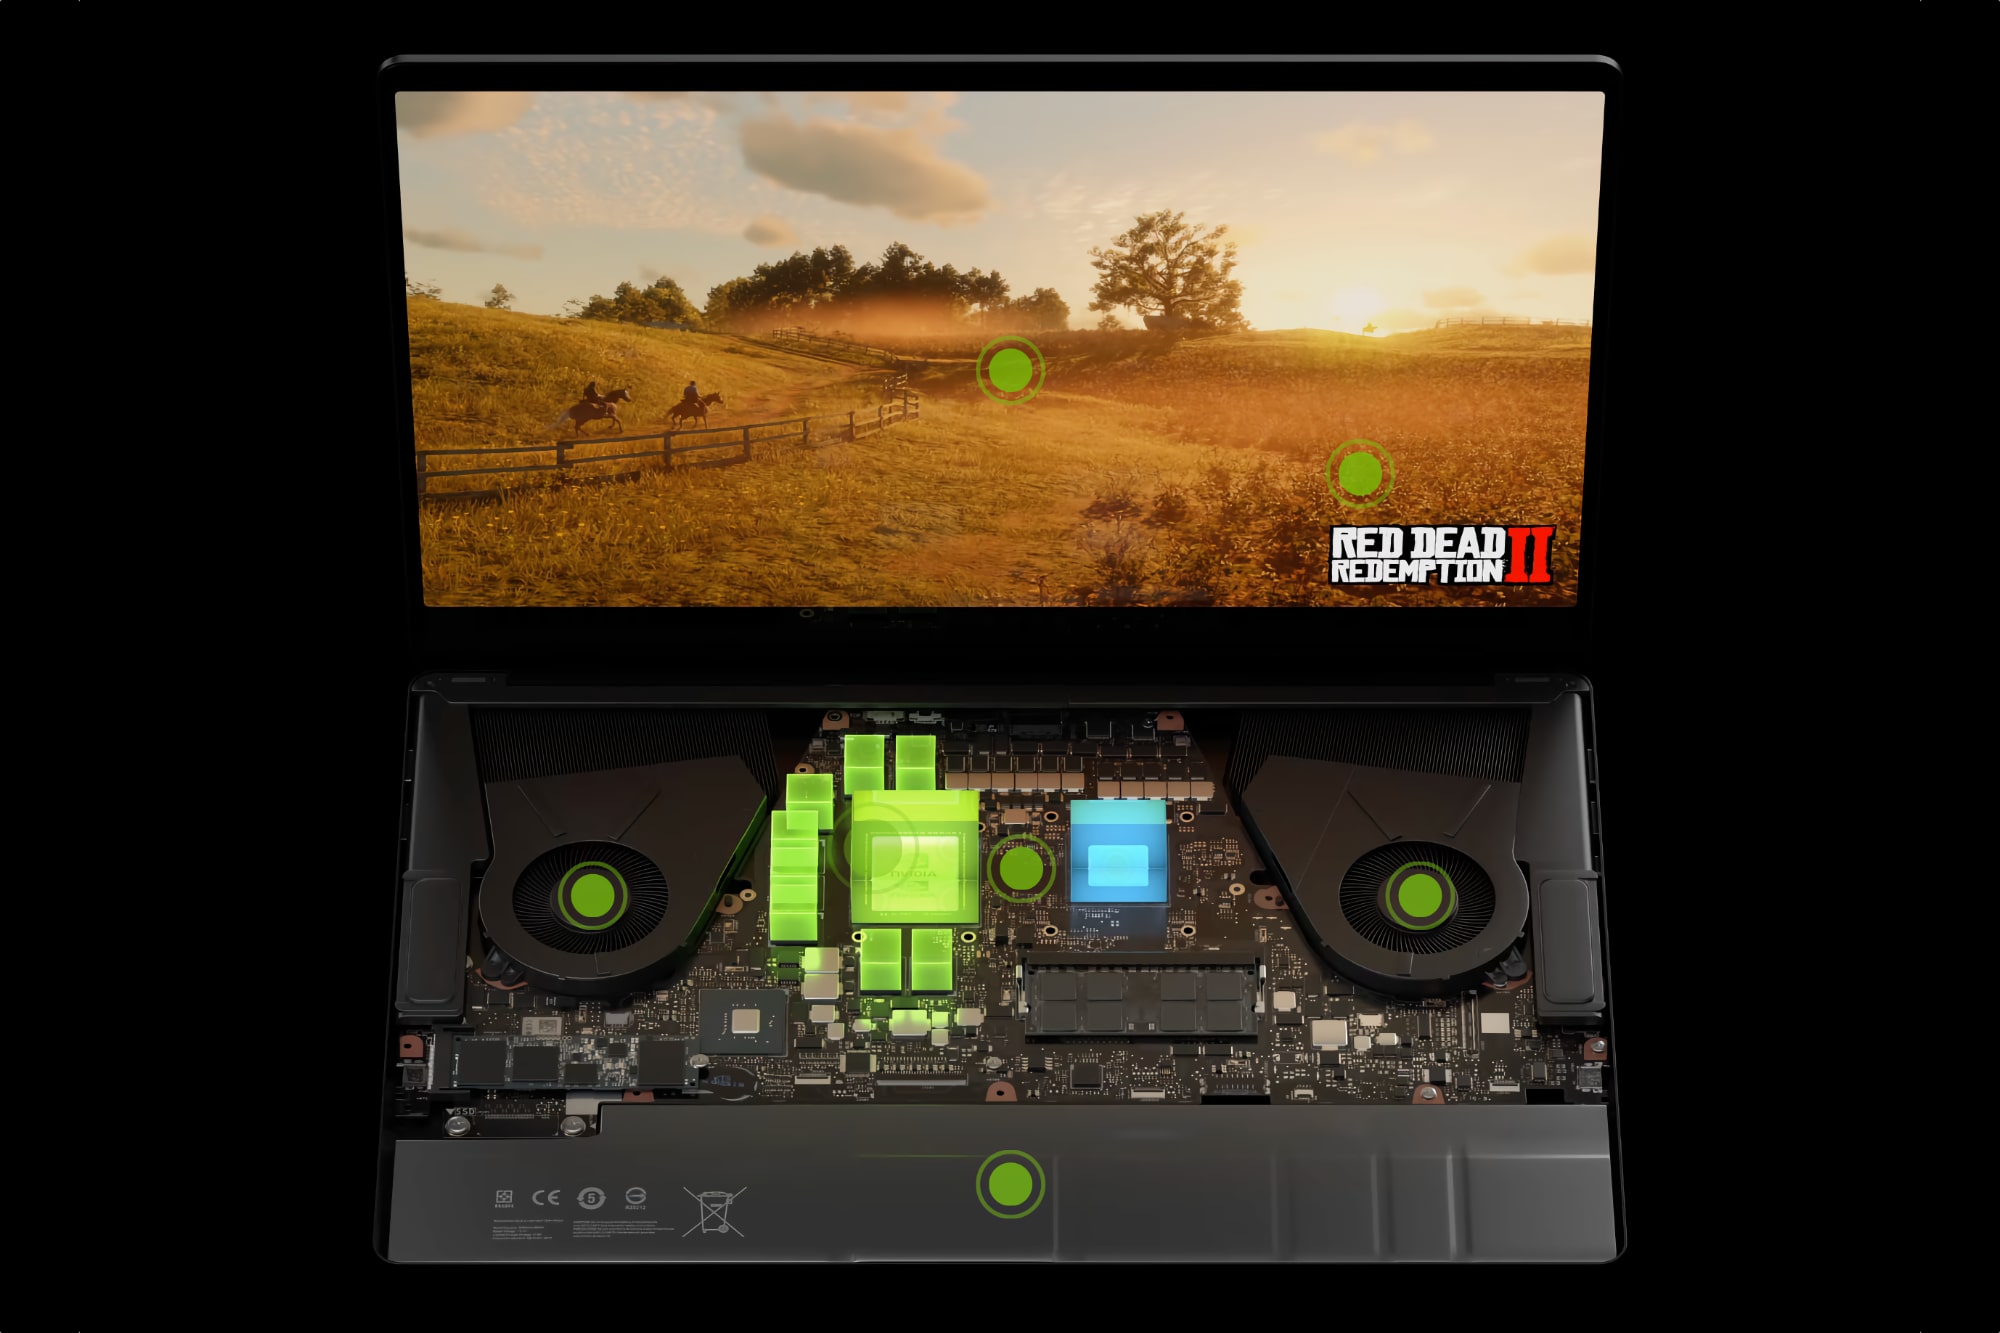 Nvidia-powered laptop showing Nividia components highlighted, running Red Dead Redemption.